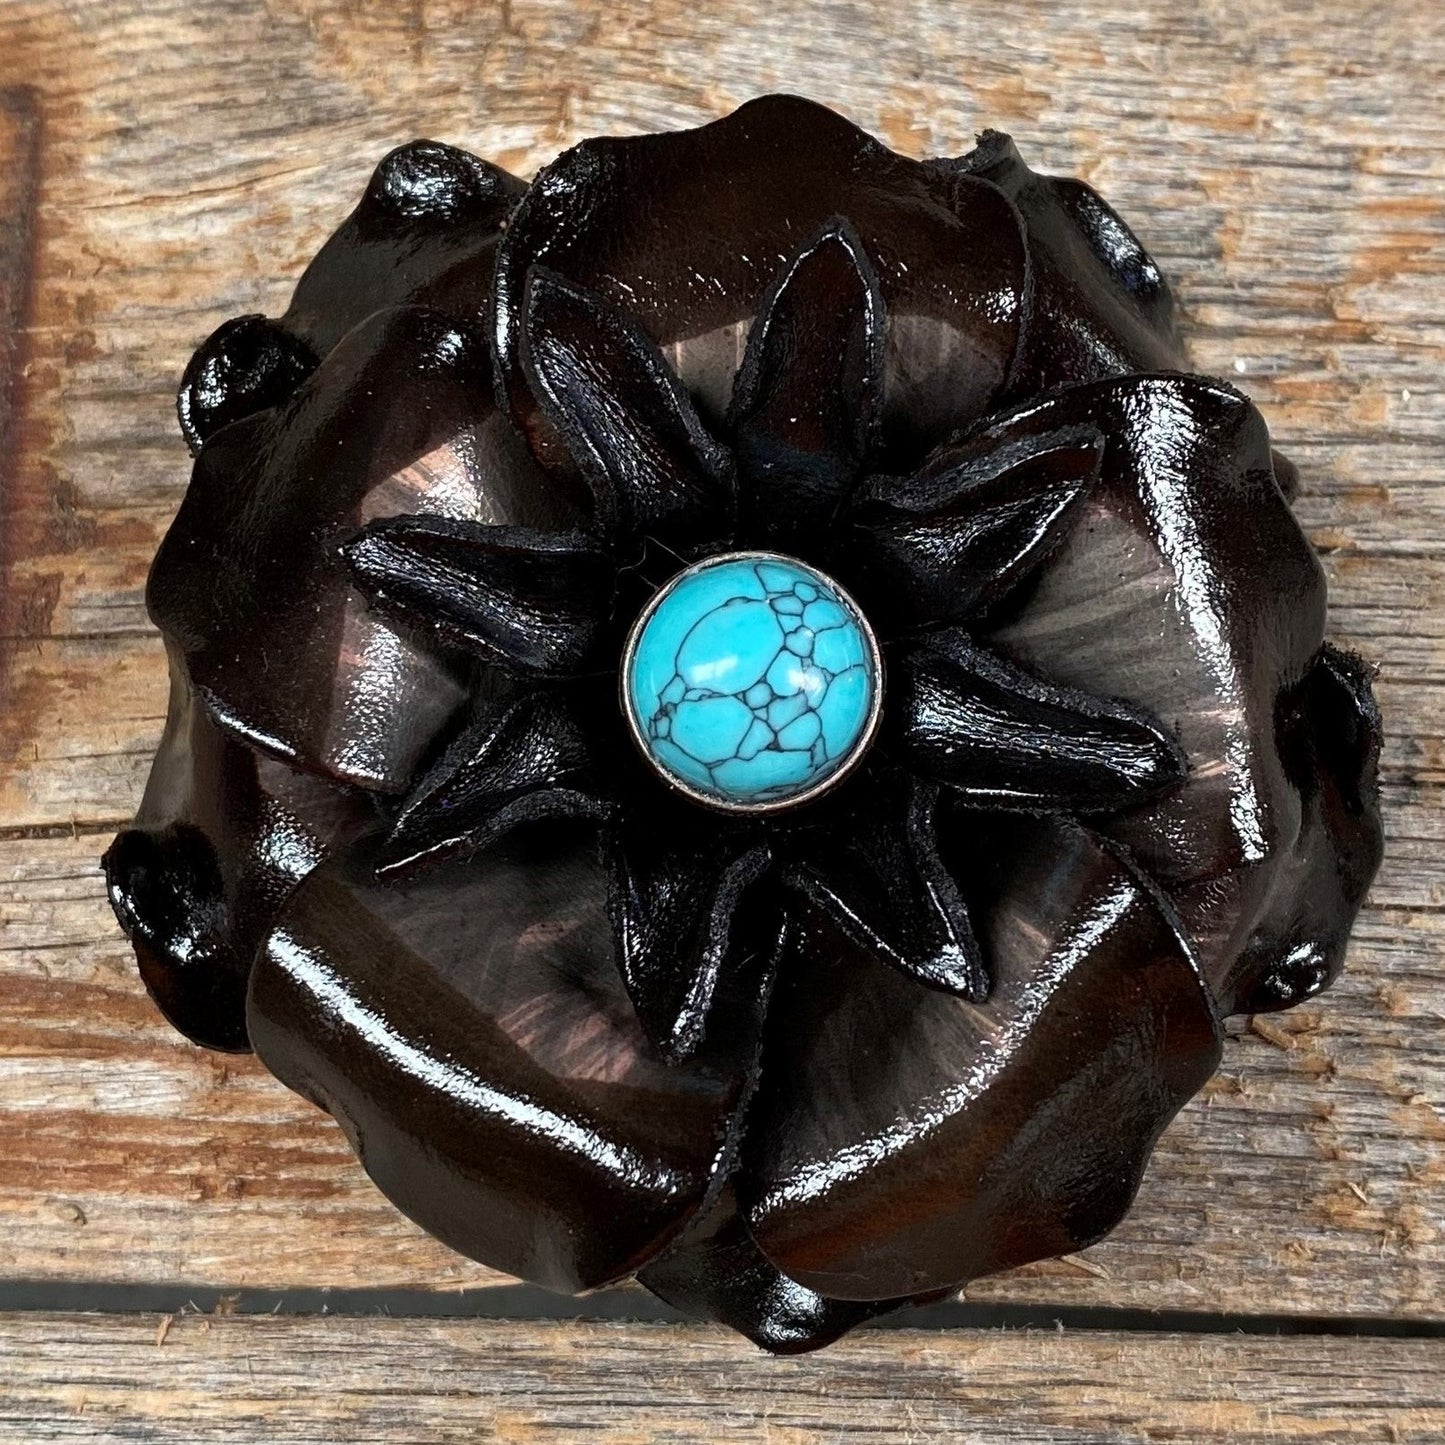 Black Gardenia Flower With Round Turquoise Cabochon